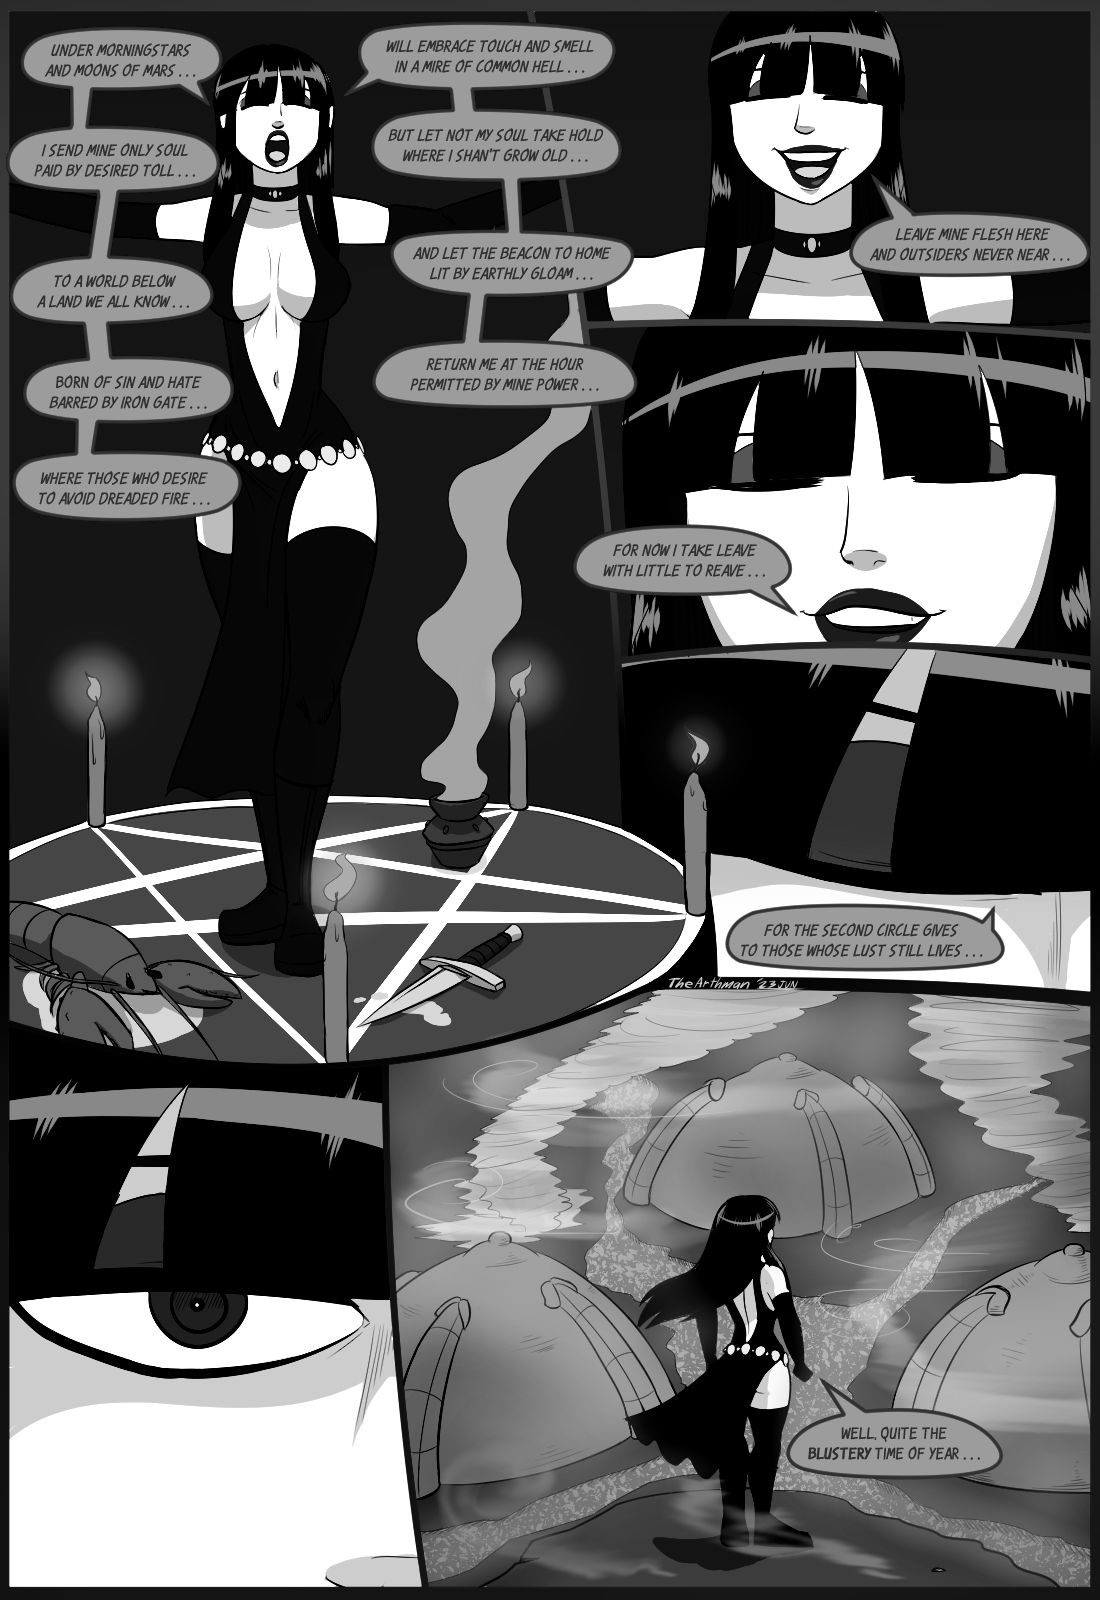 Dirtwater - Chapter 7 - Path of Sin Porn Comic english 15